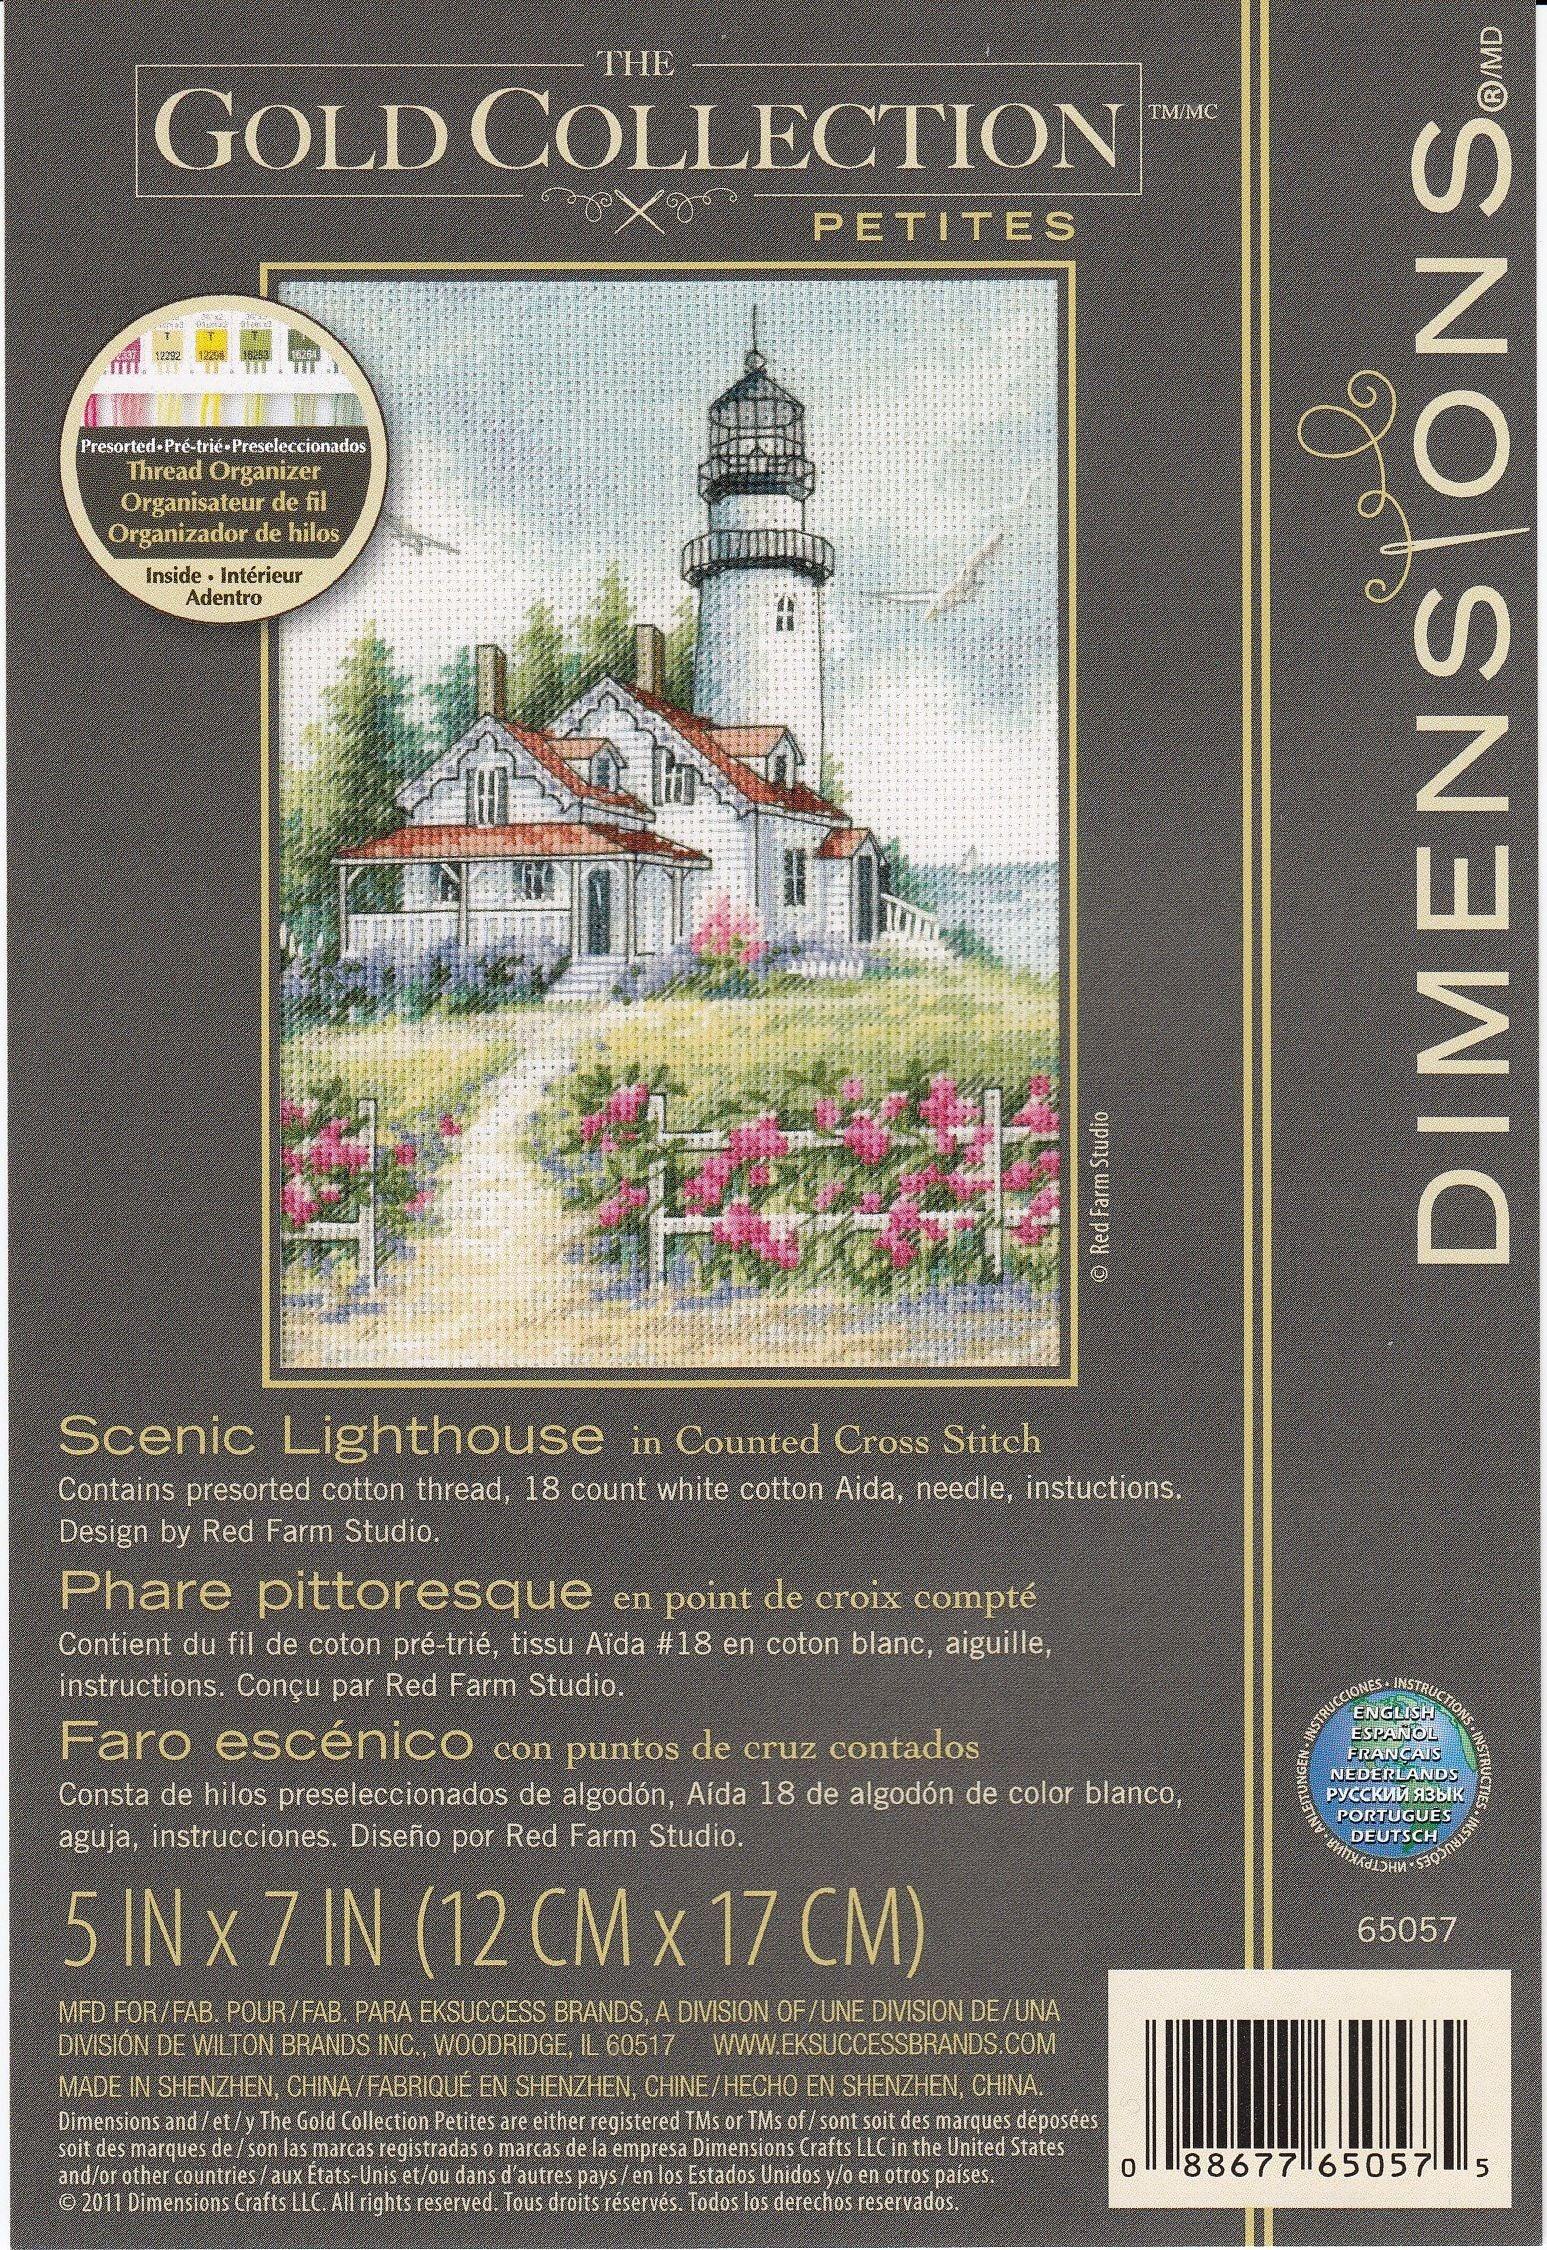 SCENIC LIGHTHOUSE, Counted Cross Stitch Kit, 18 count white Aida, DIMENSIONS, Gold Collection (65057) - Leo Hobby